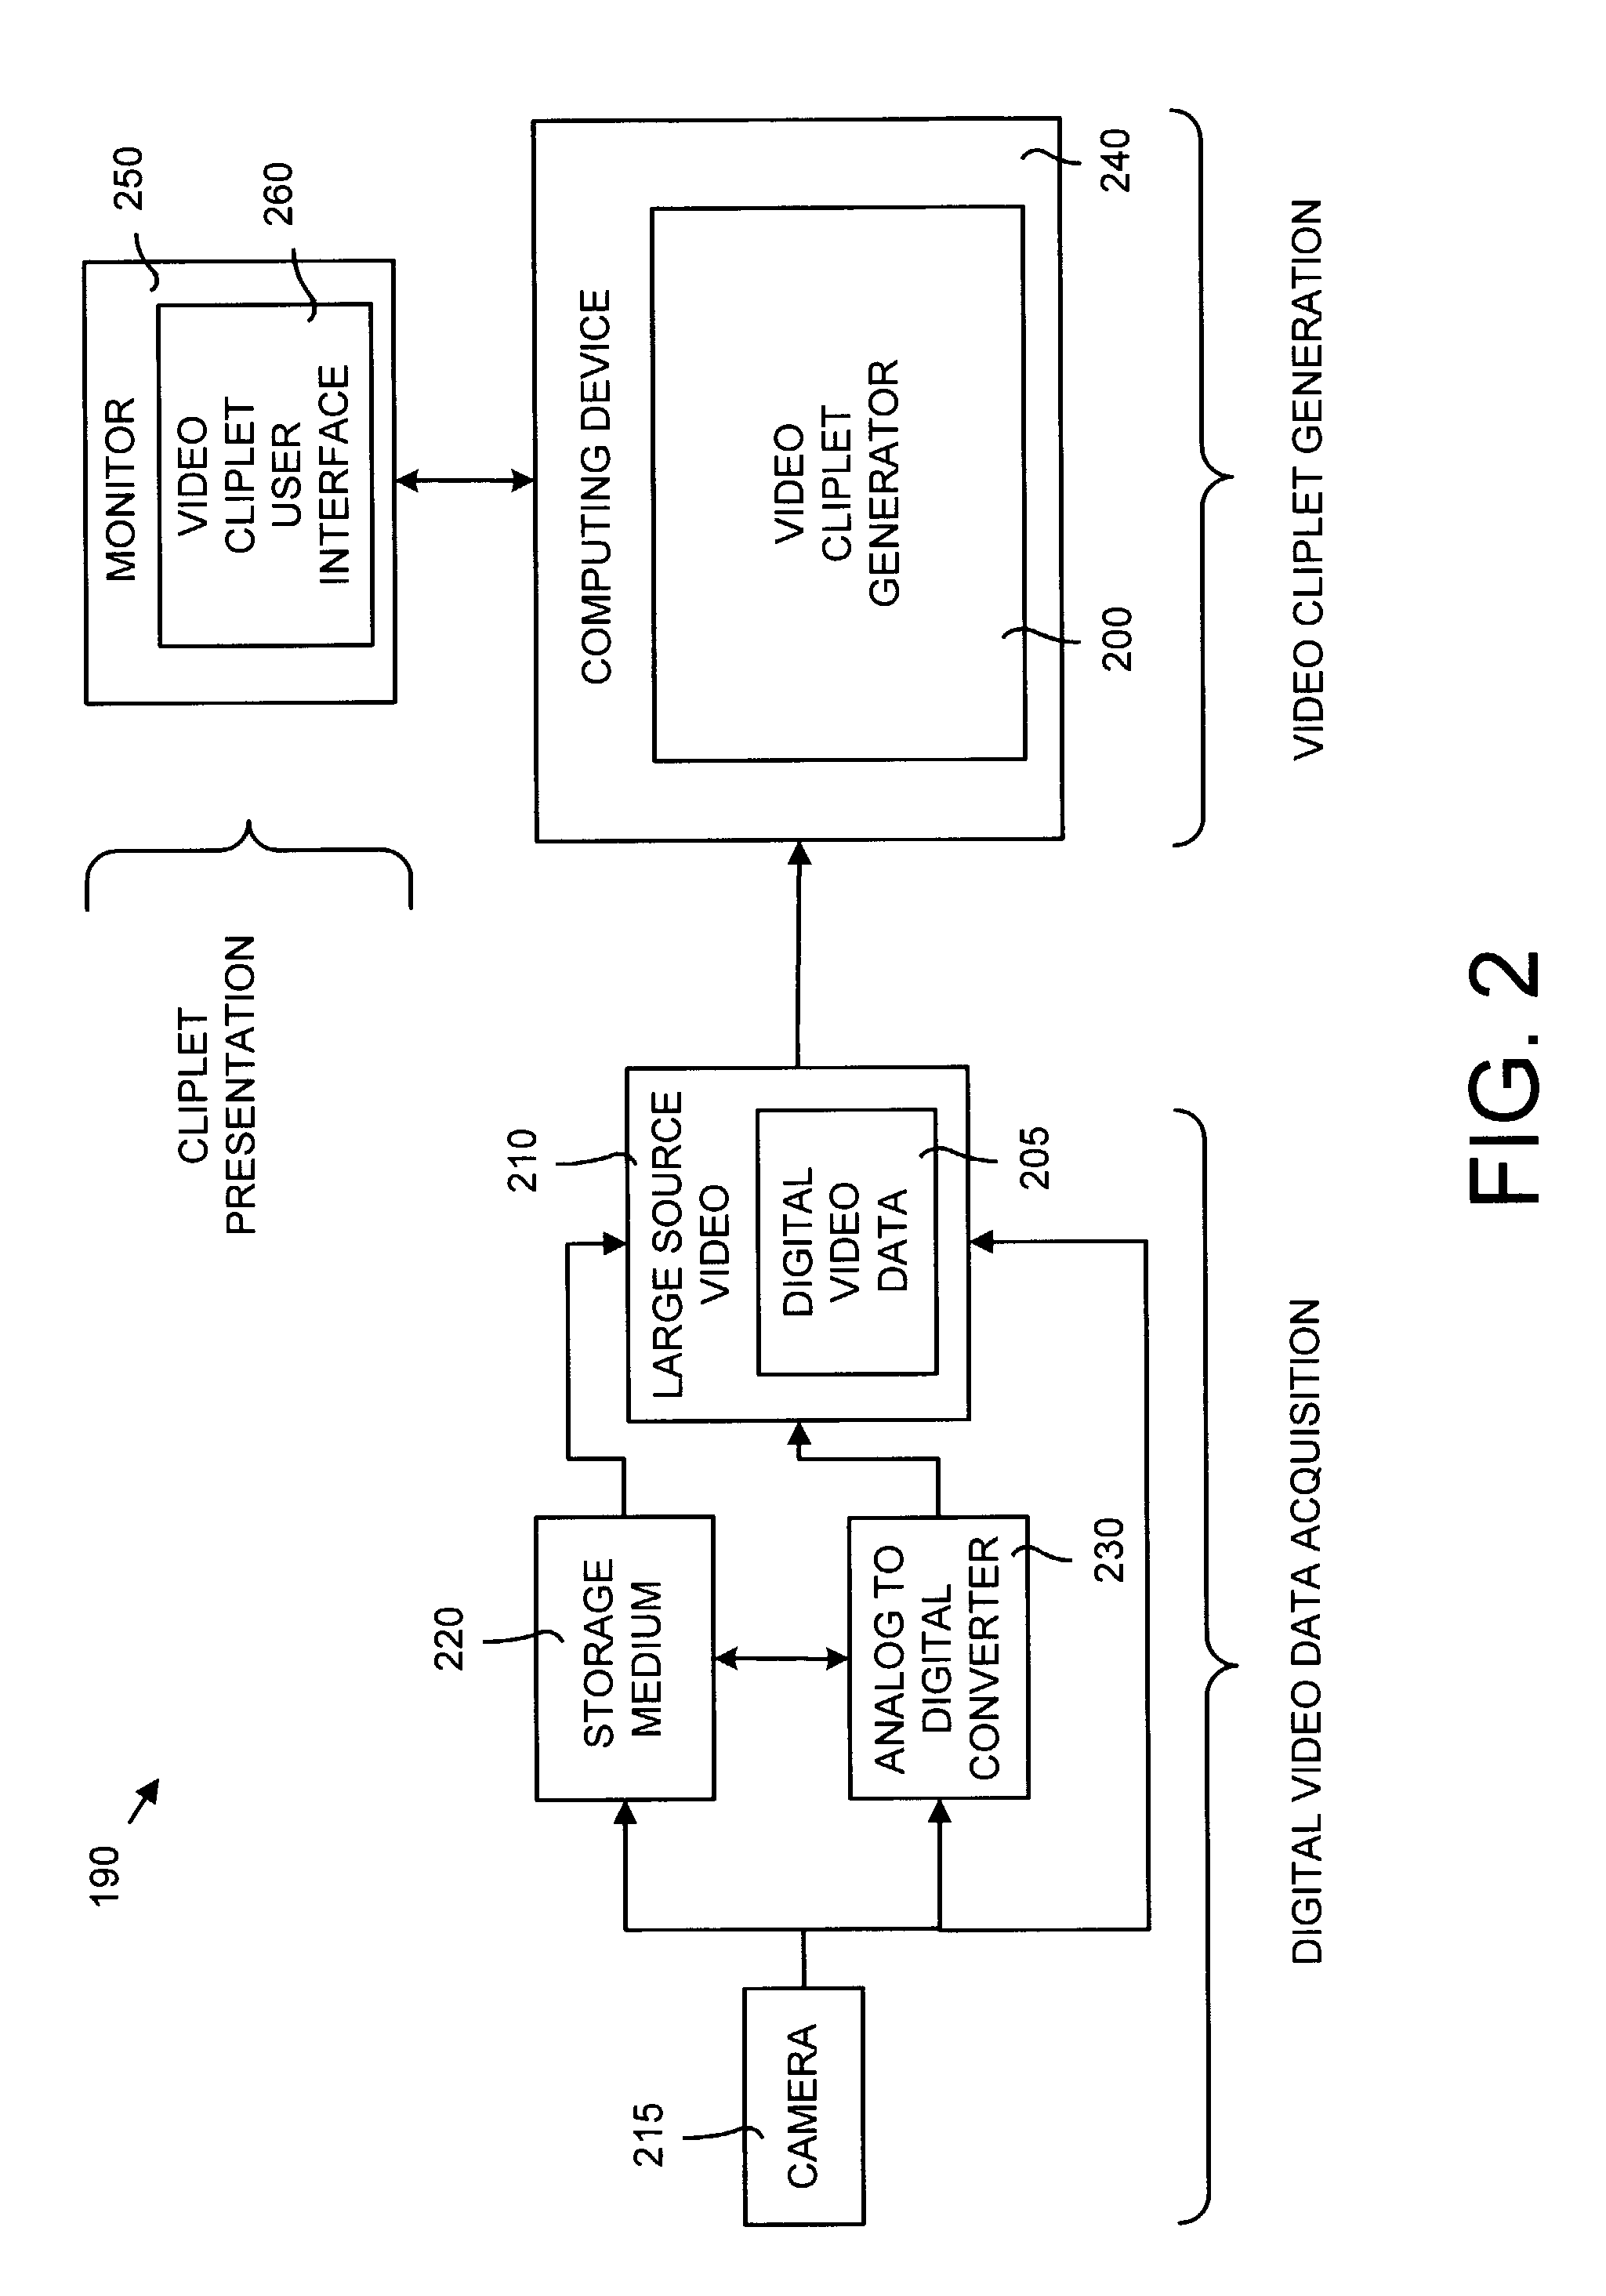 System and method for automatically generating video cliplets from digital video